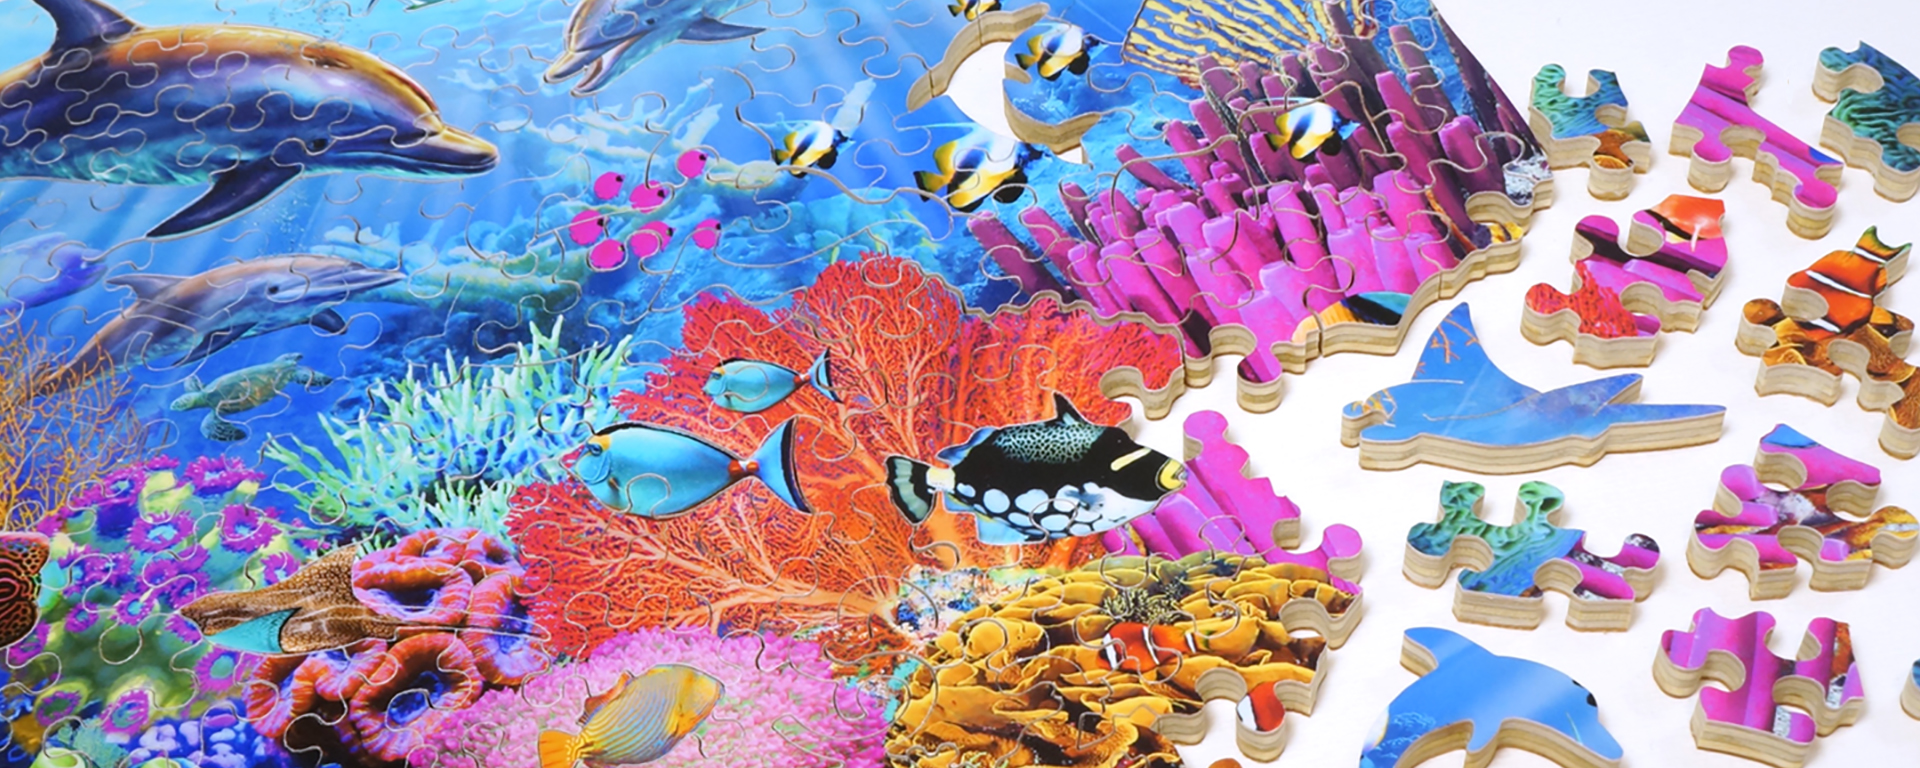 Wooden marine life jigsaw puzzle in progress featuring a colorful coral reef ocean scene with dolphins and fish as well as whimsy shaped puzzle pieces of dolphins and stingrays.